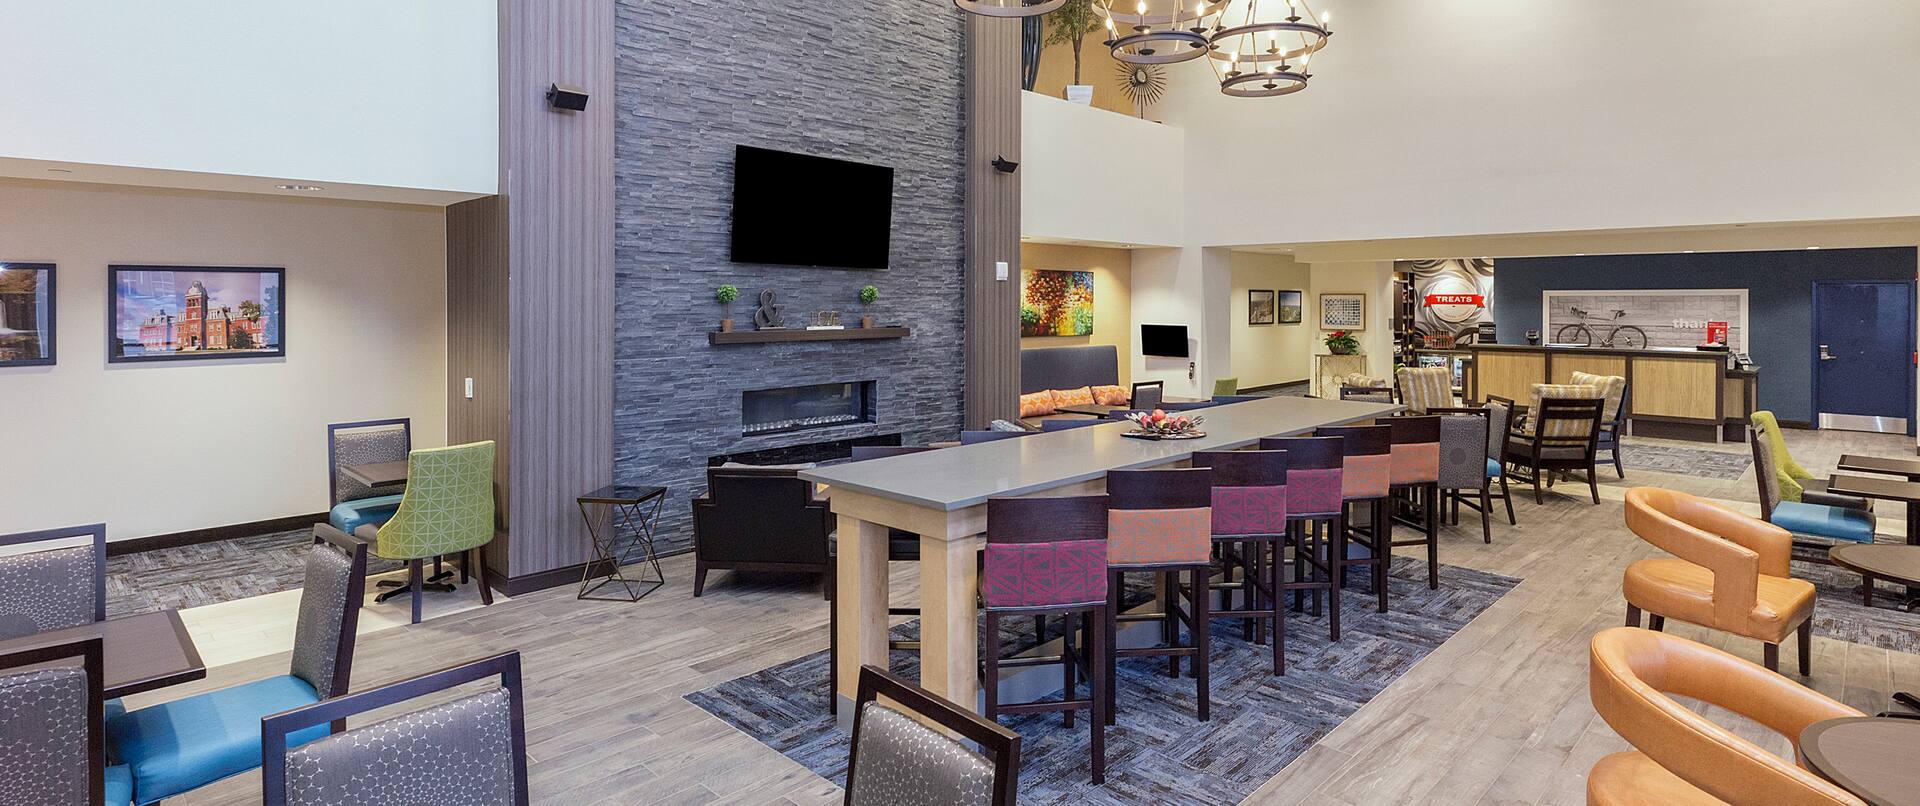 Breakfast Dining Area with Chairs, Tables and Wall Mounted HDTV